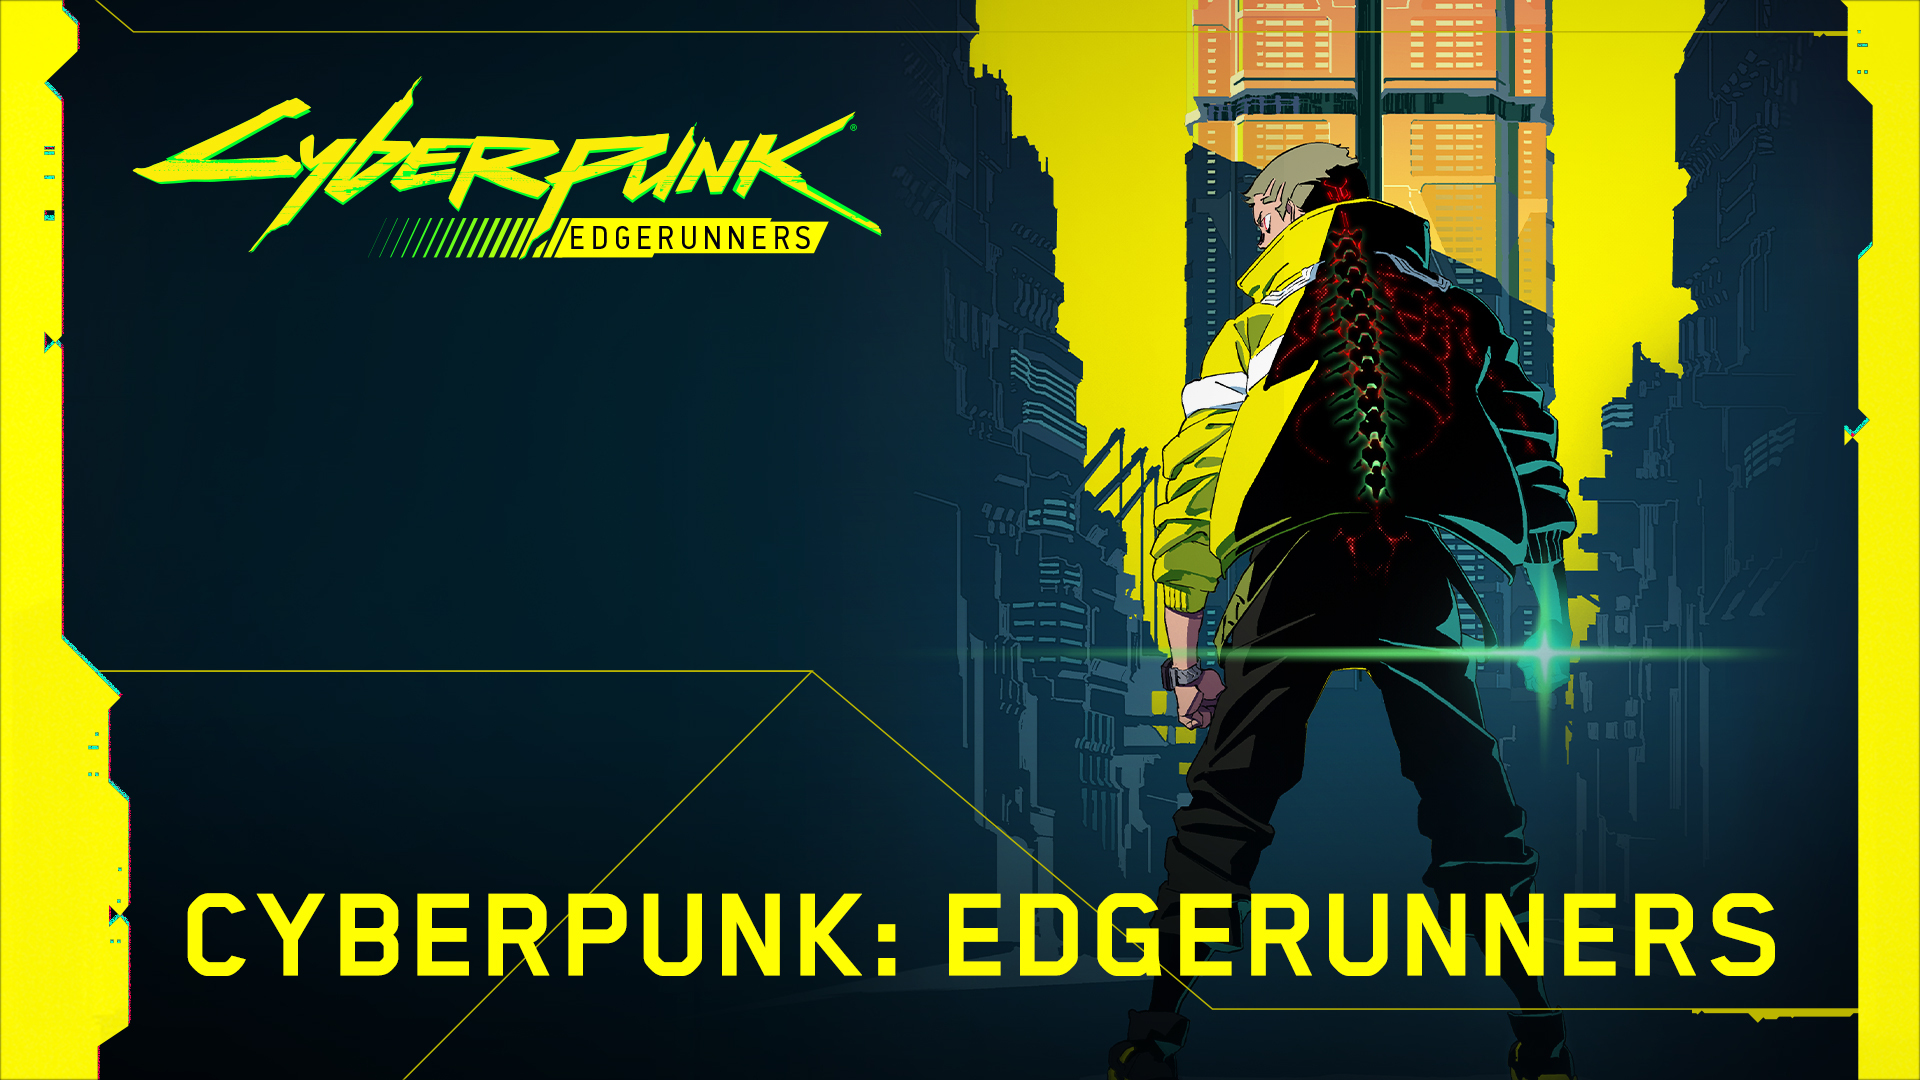 Cyberpunk Edgerunners: will there be a Season 2 for the anime